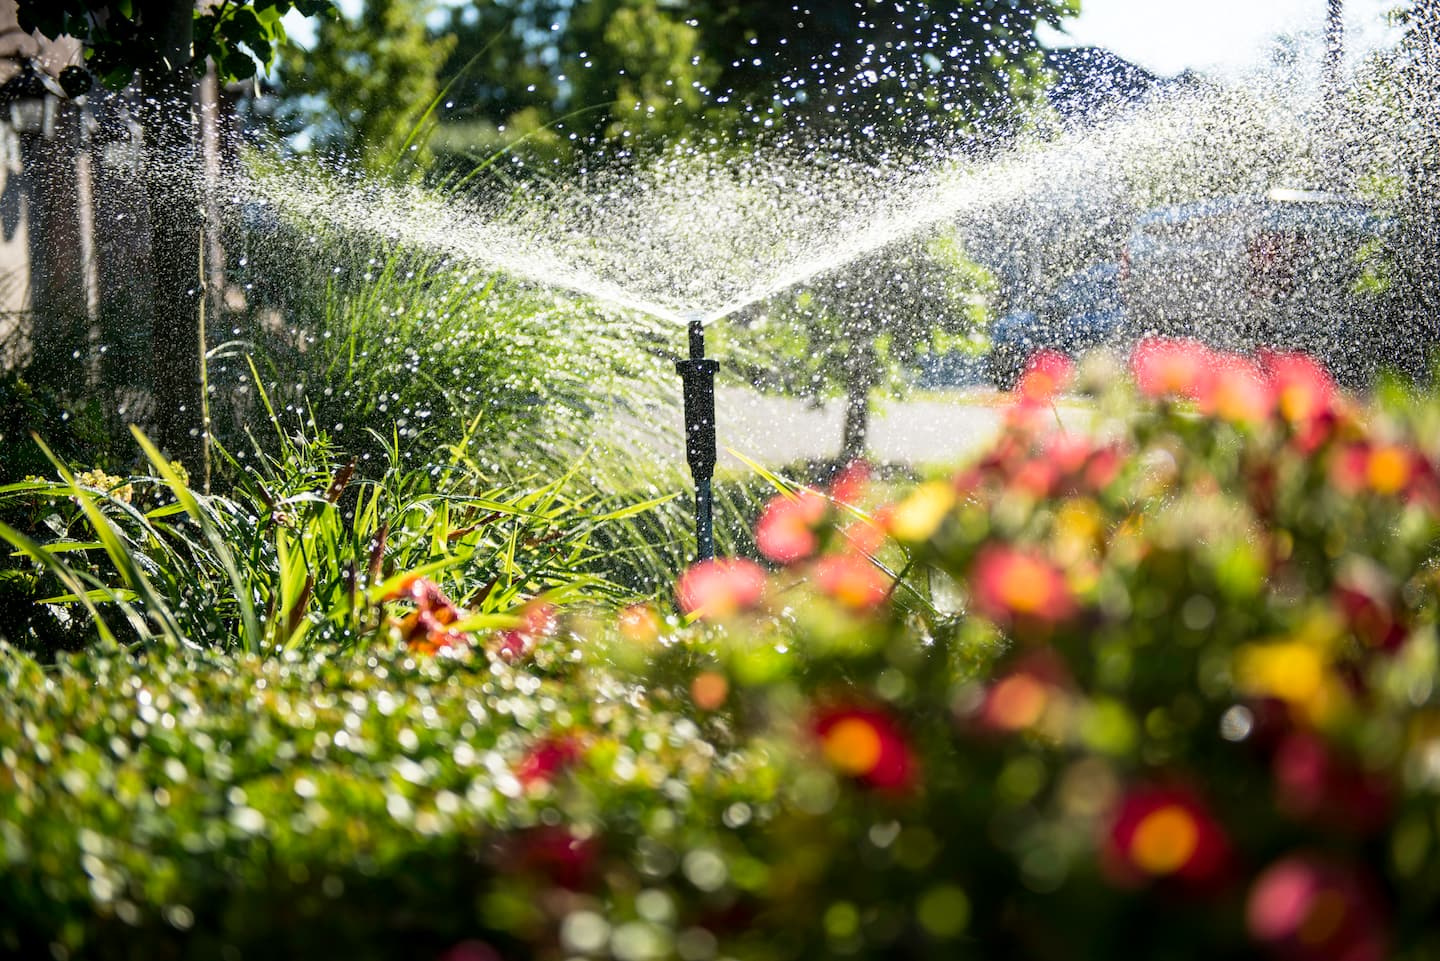 How to reduce your water consumption without neglecting the lawn and plants in the yard